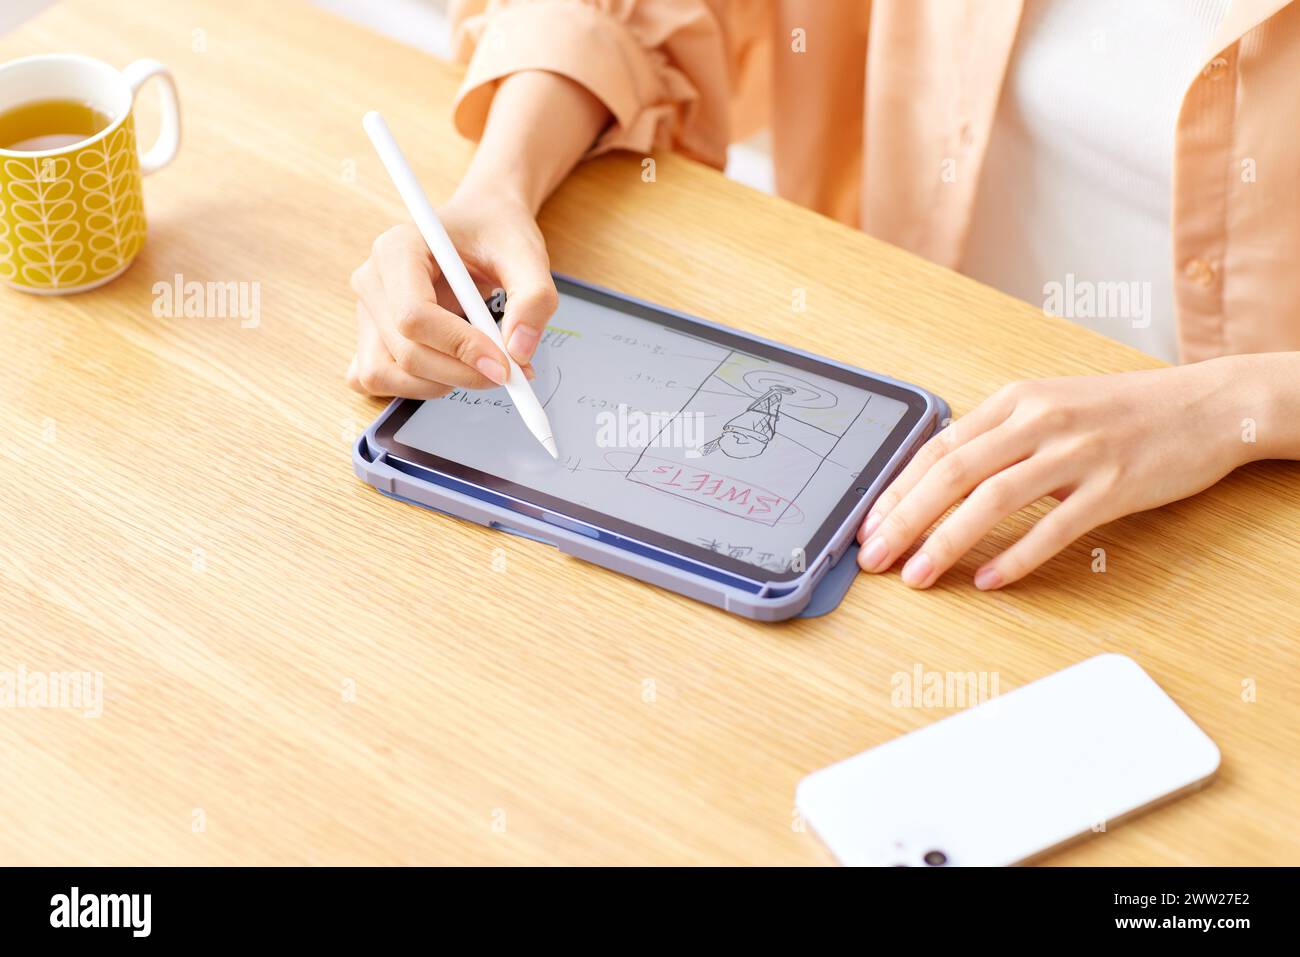 A woman writing on a tablet with a pen Stock Photo